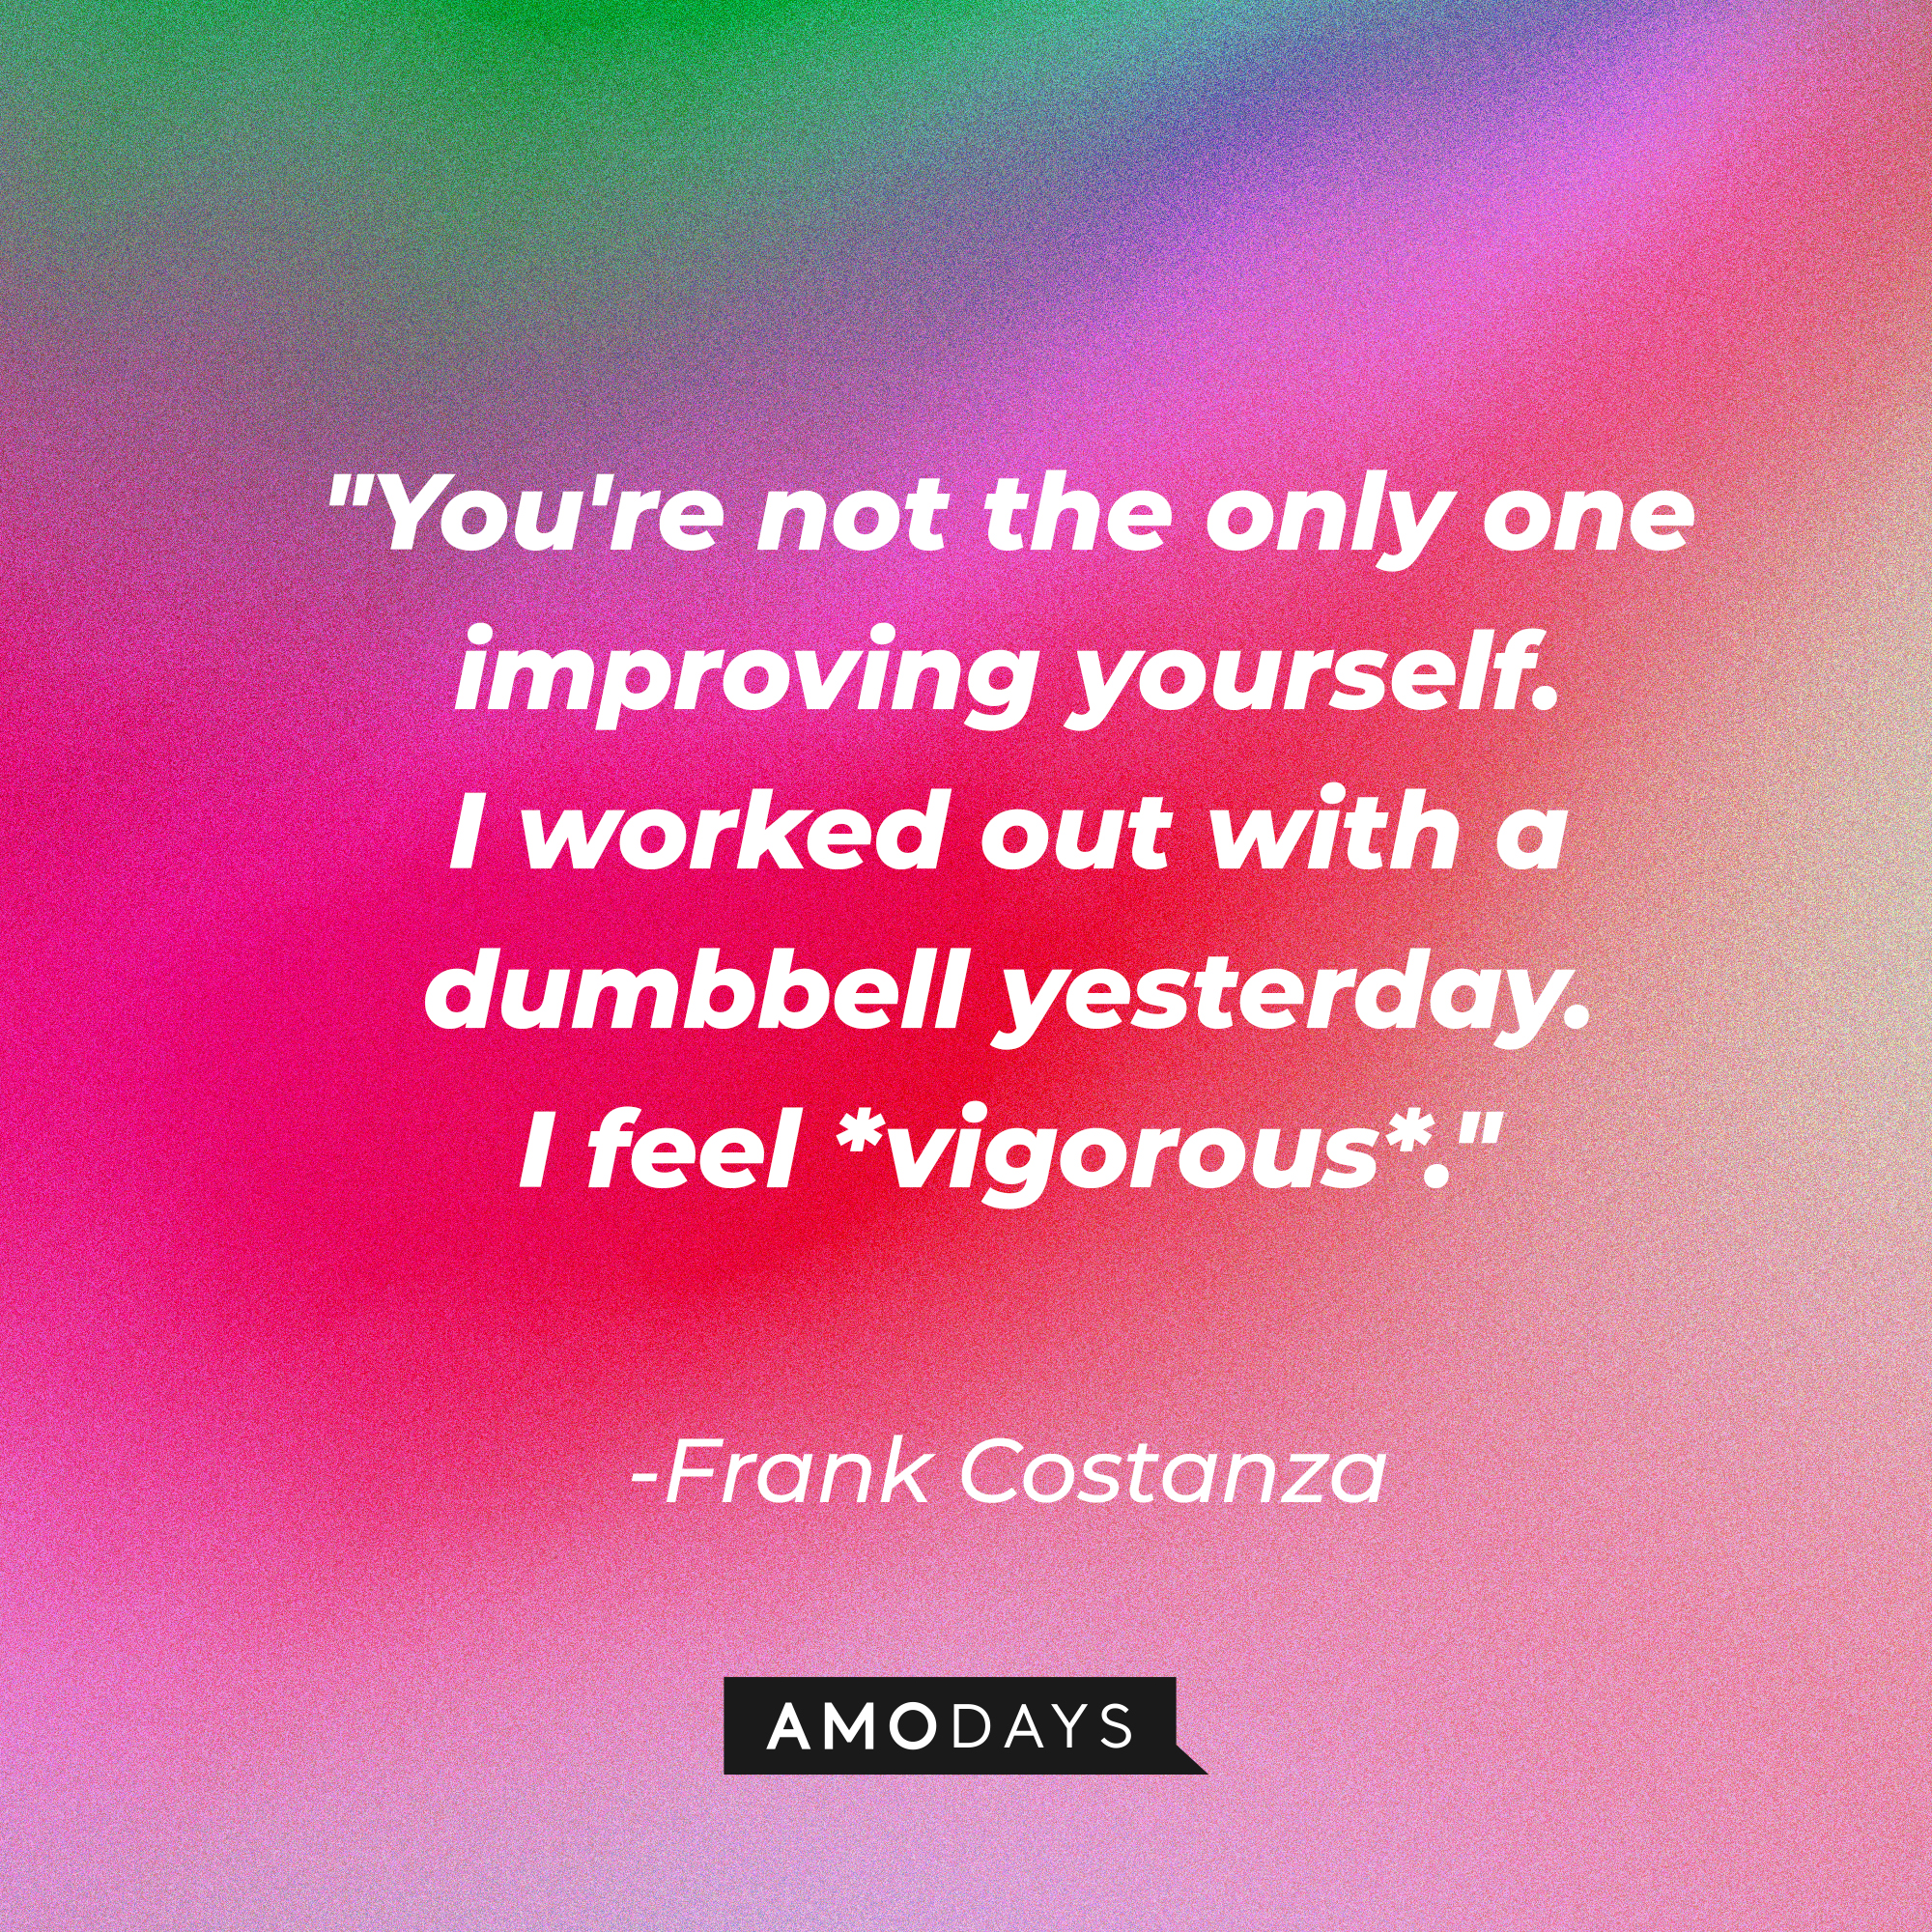 A photo with Frank Costanza's quote, "You're not the only one improving yourself. I worked out with a dumbbell yesterday. I feel *vigorous*." | Source: Amodays